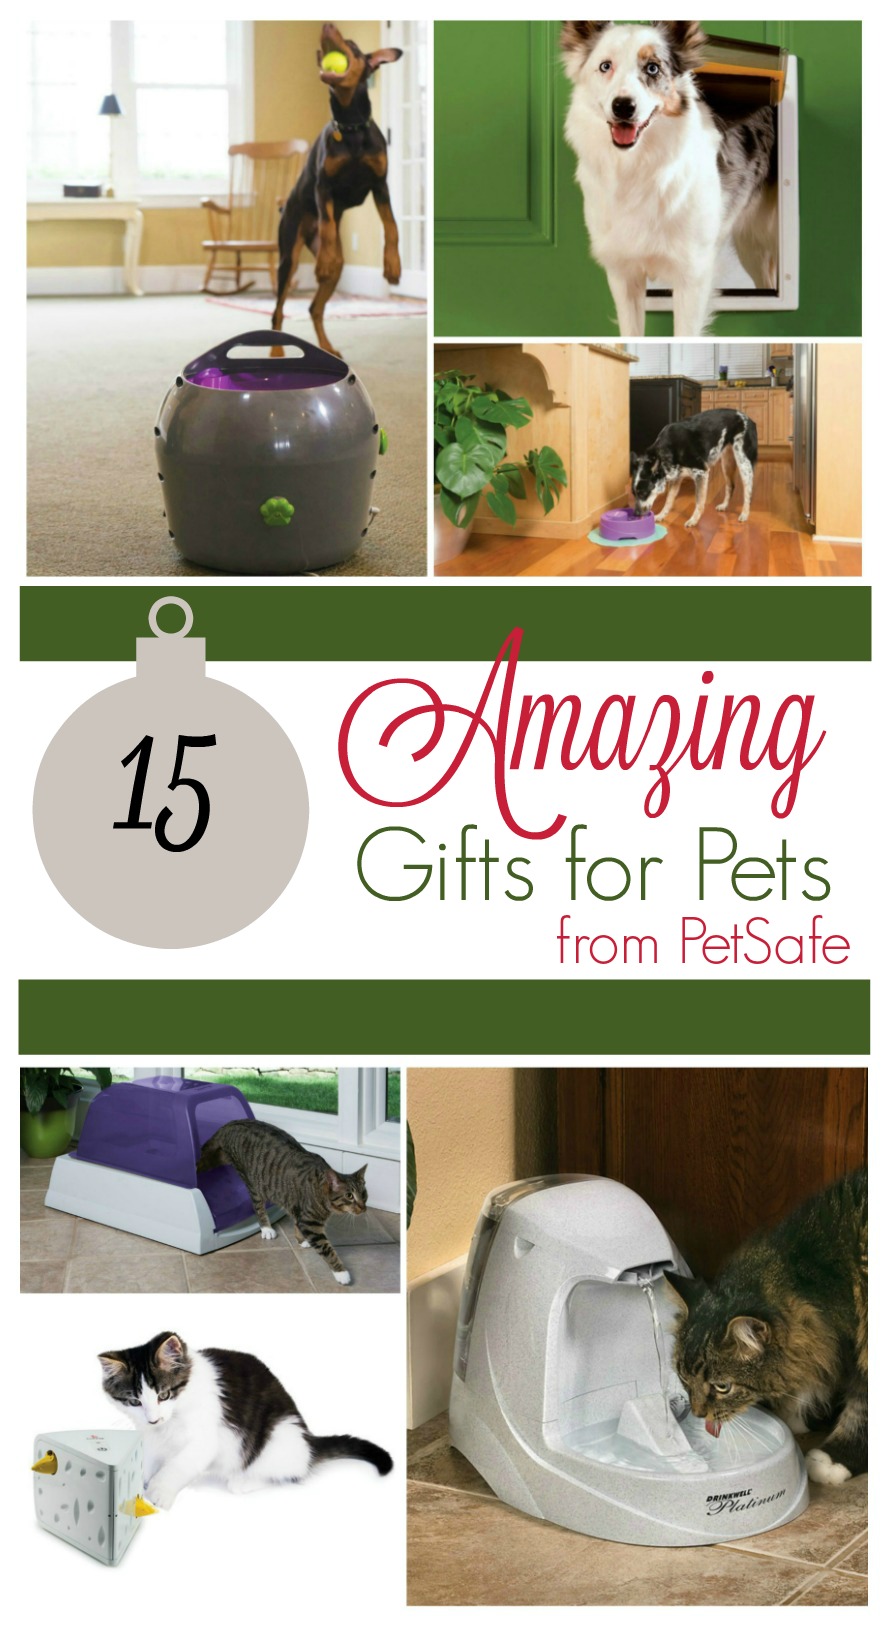 Looking for the purrfect gifts for your dog or cat? Check out these 15 amazing gifts for pets from PetSafe here!